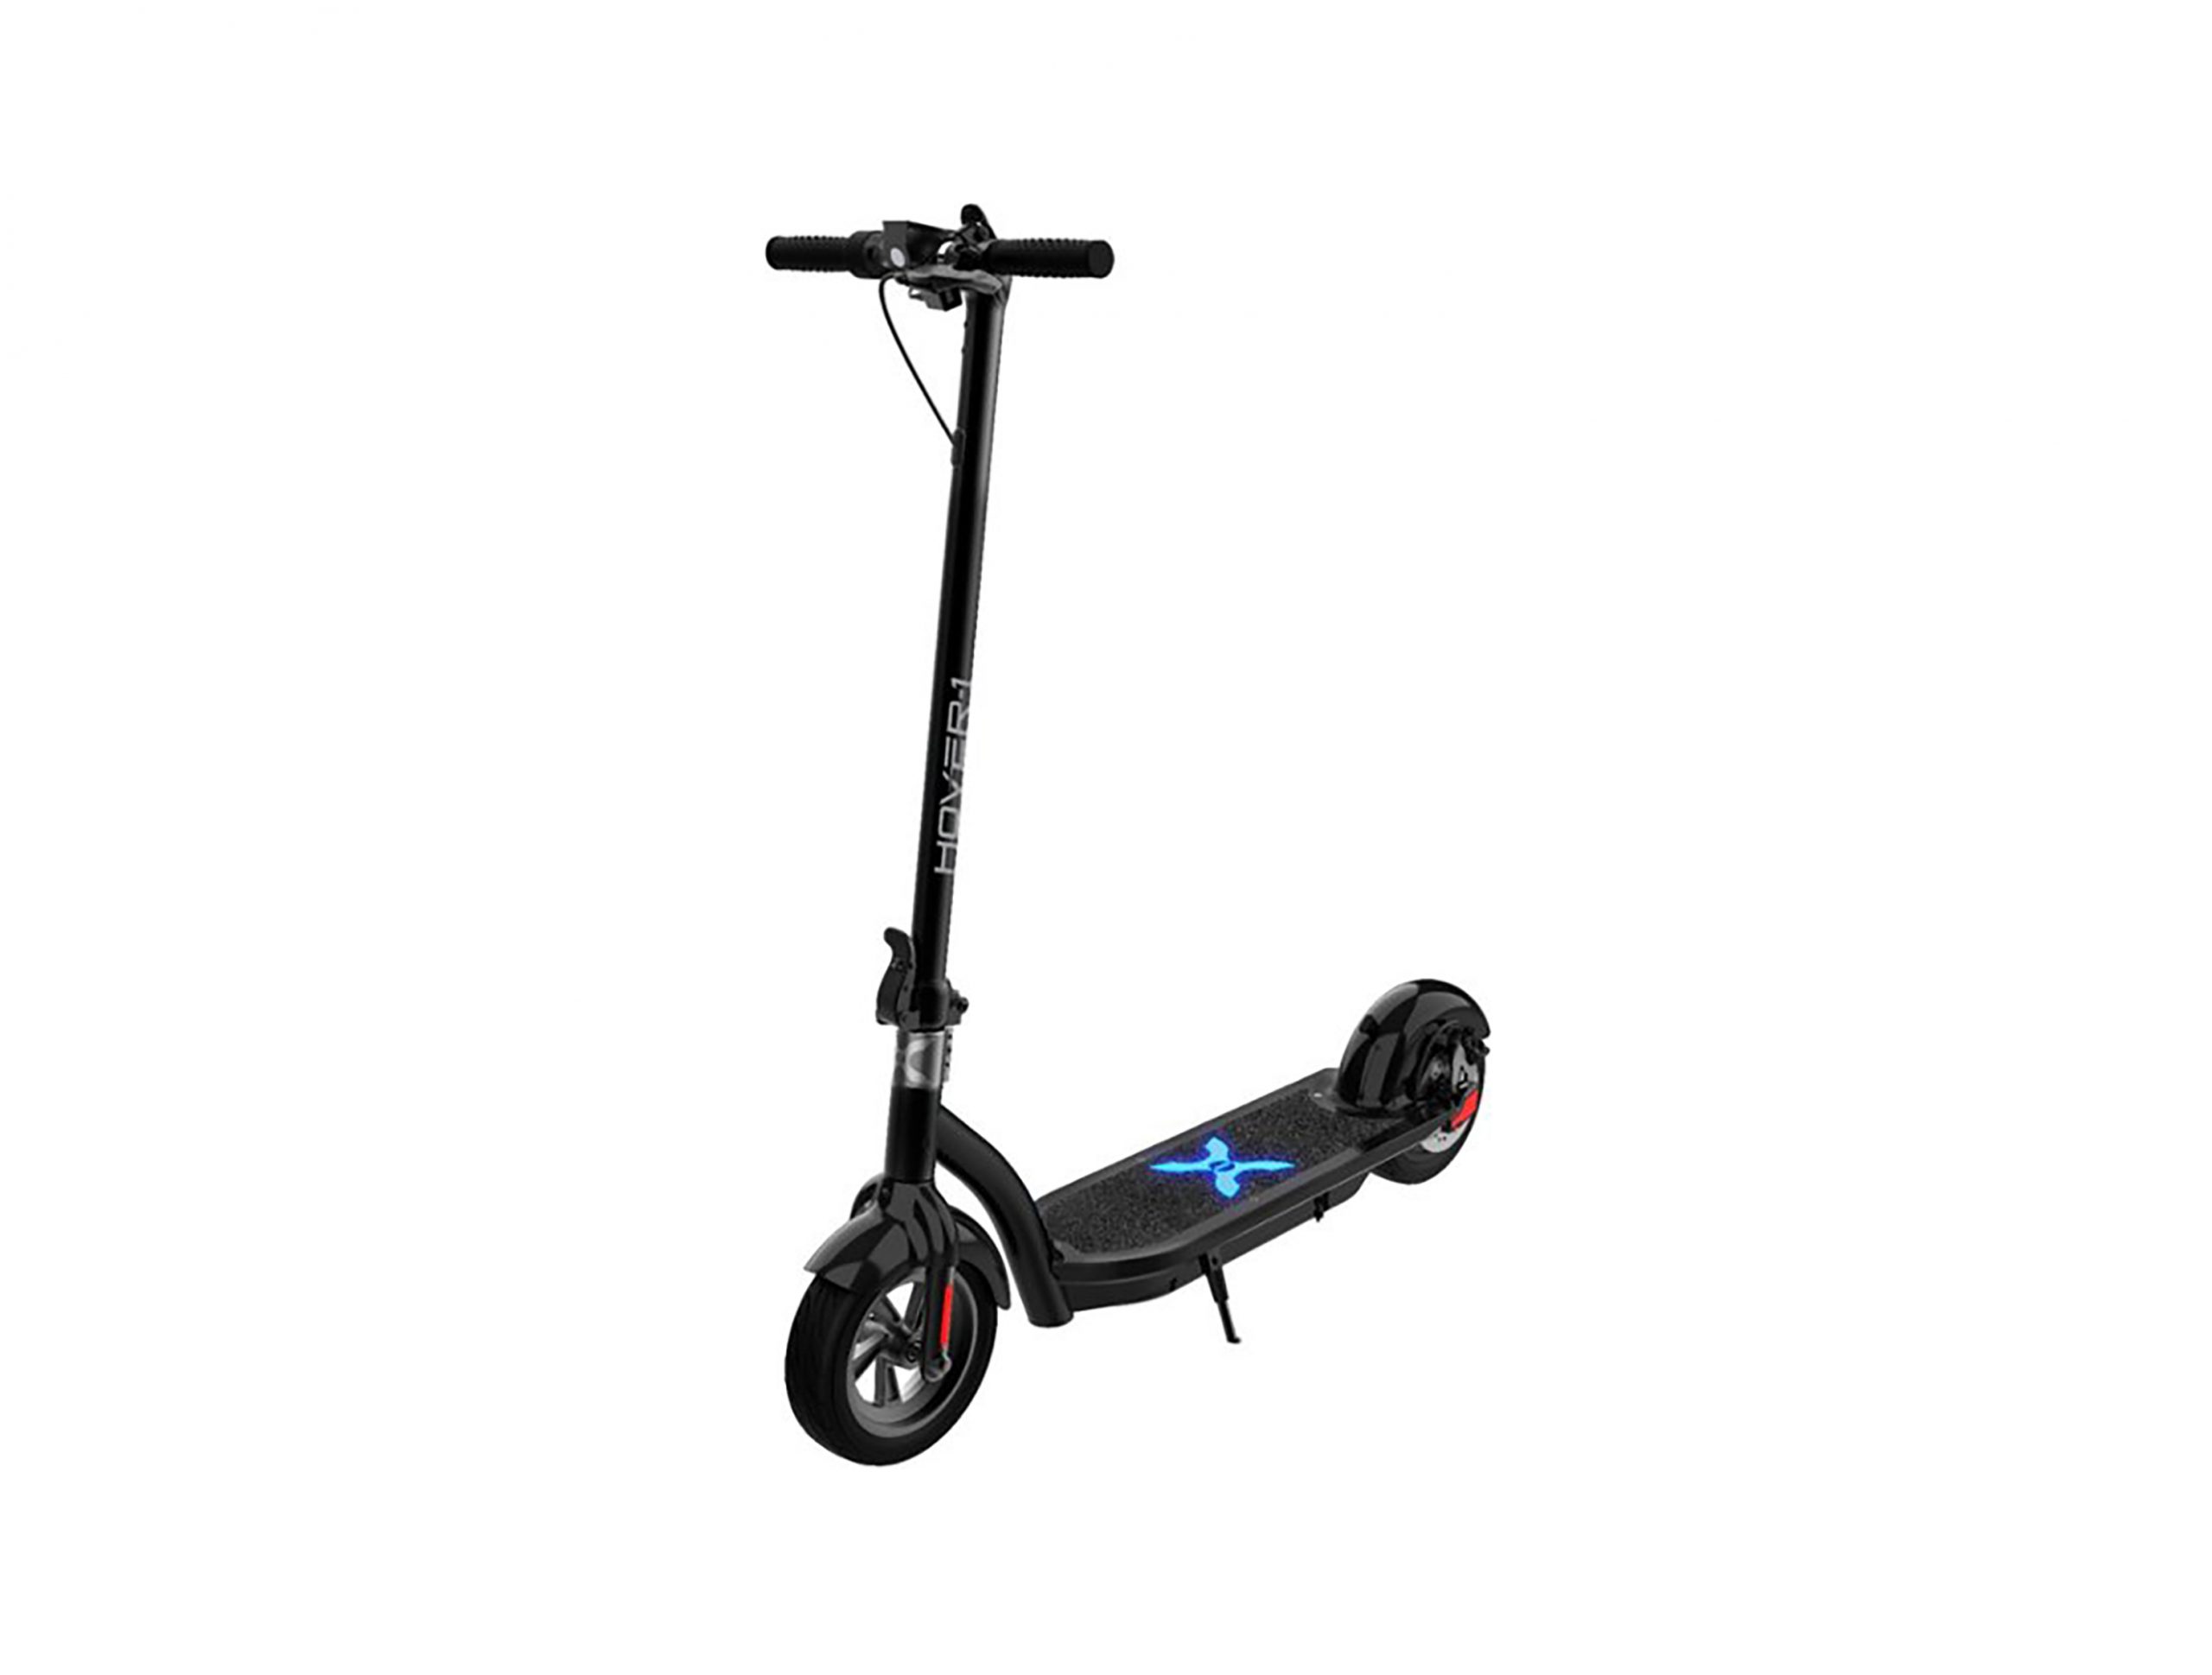 Hover-1 Alpha Electric Kick Scooter